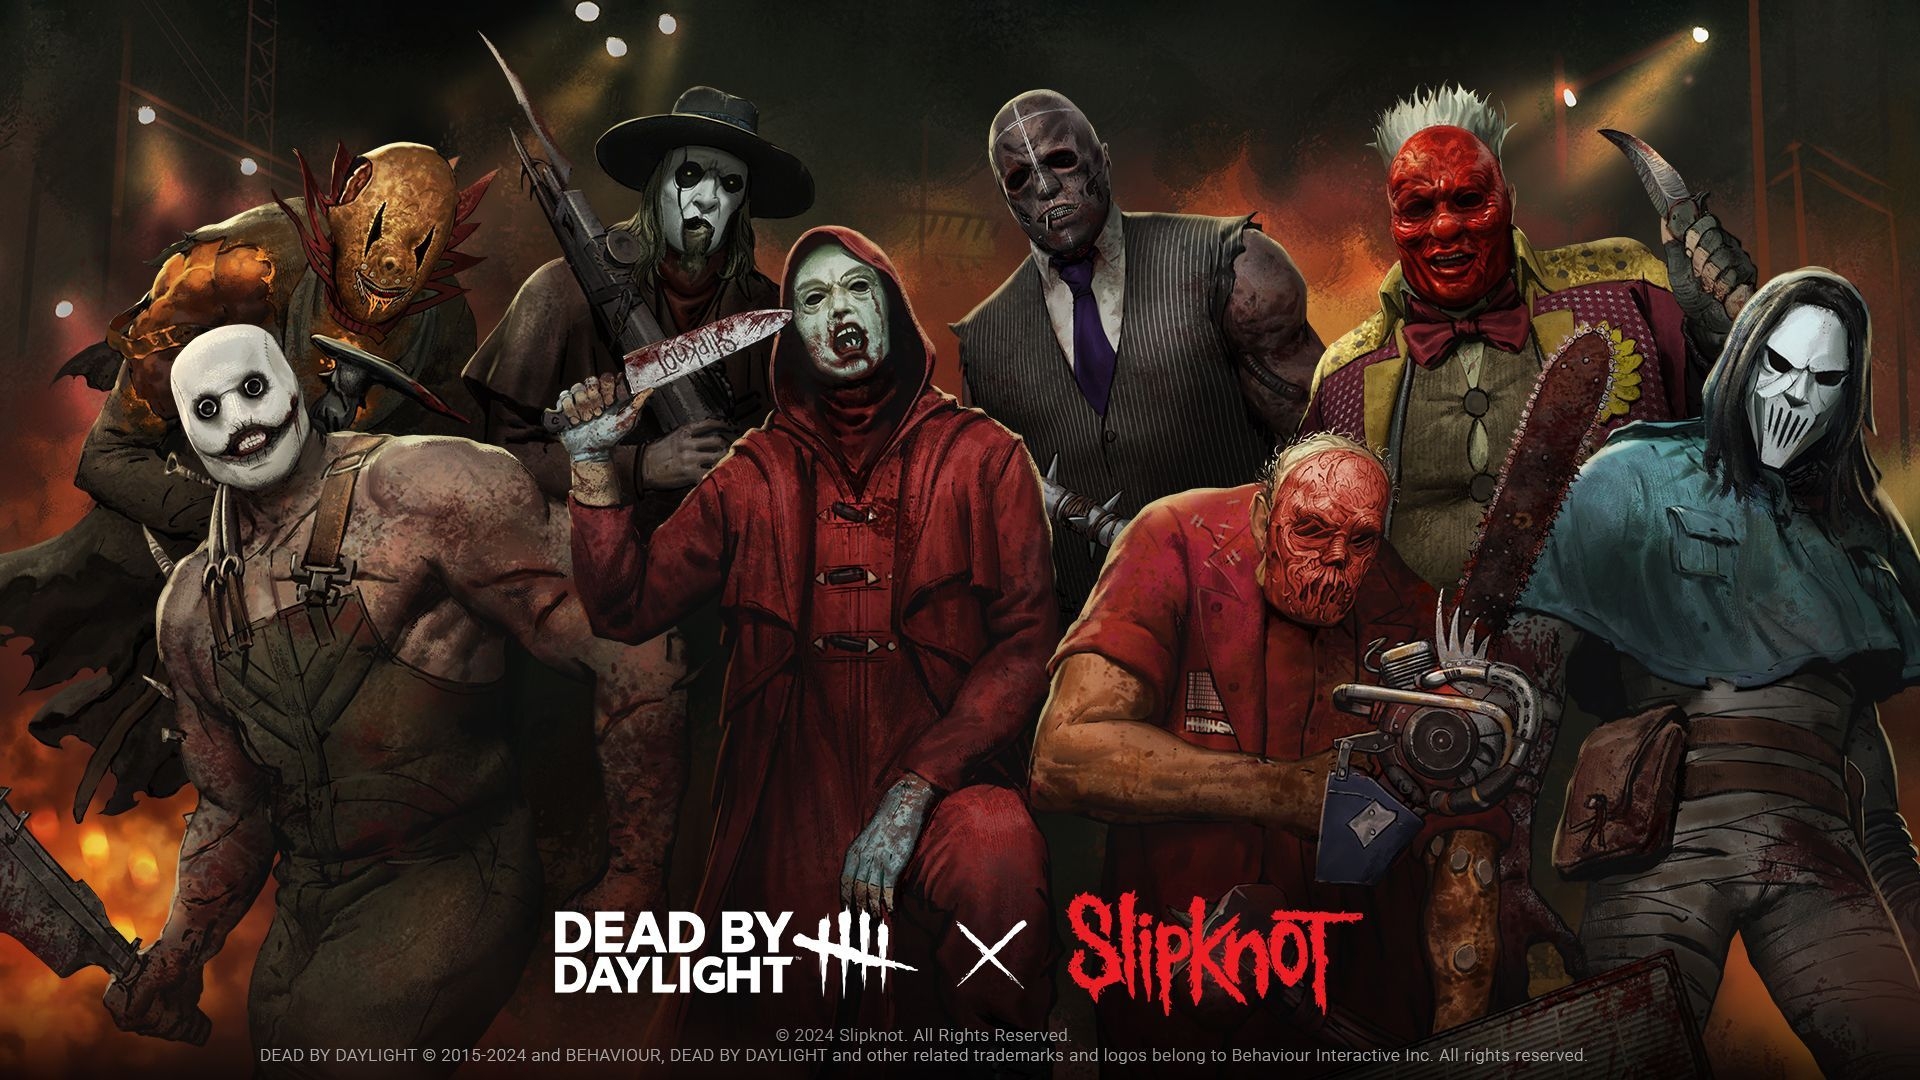 Dead by Daylight releases new cosmetics as part of collaboration with Slipknot